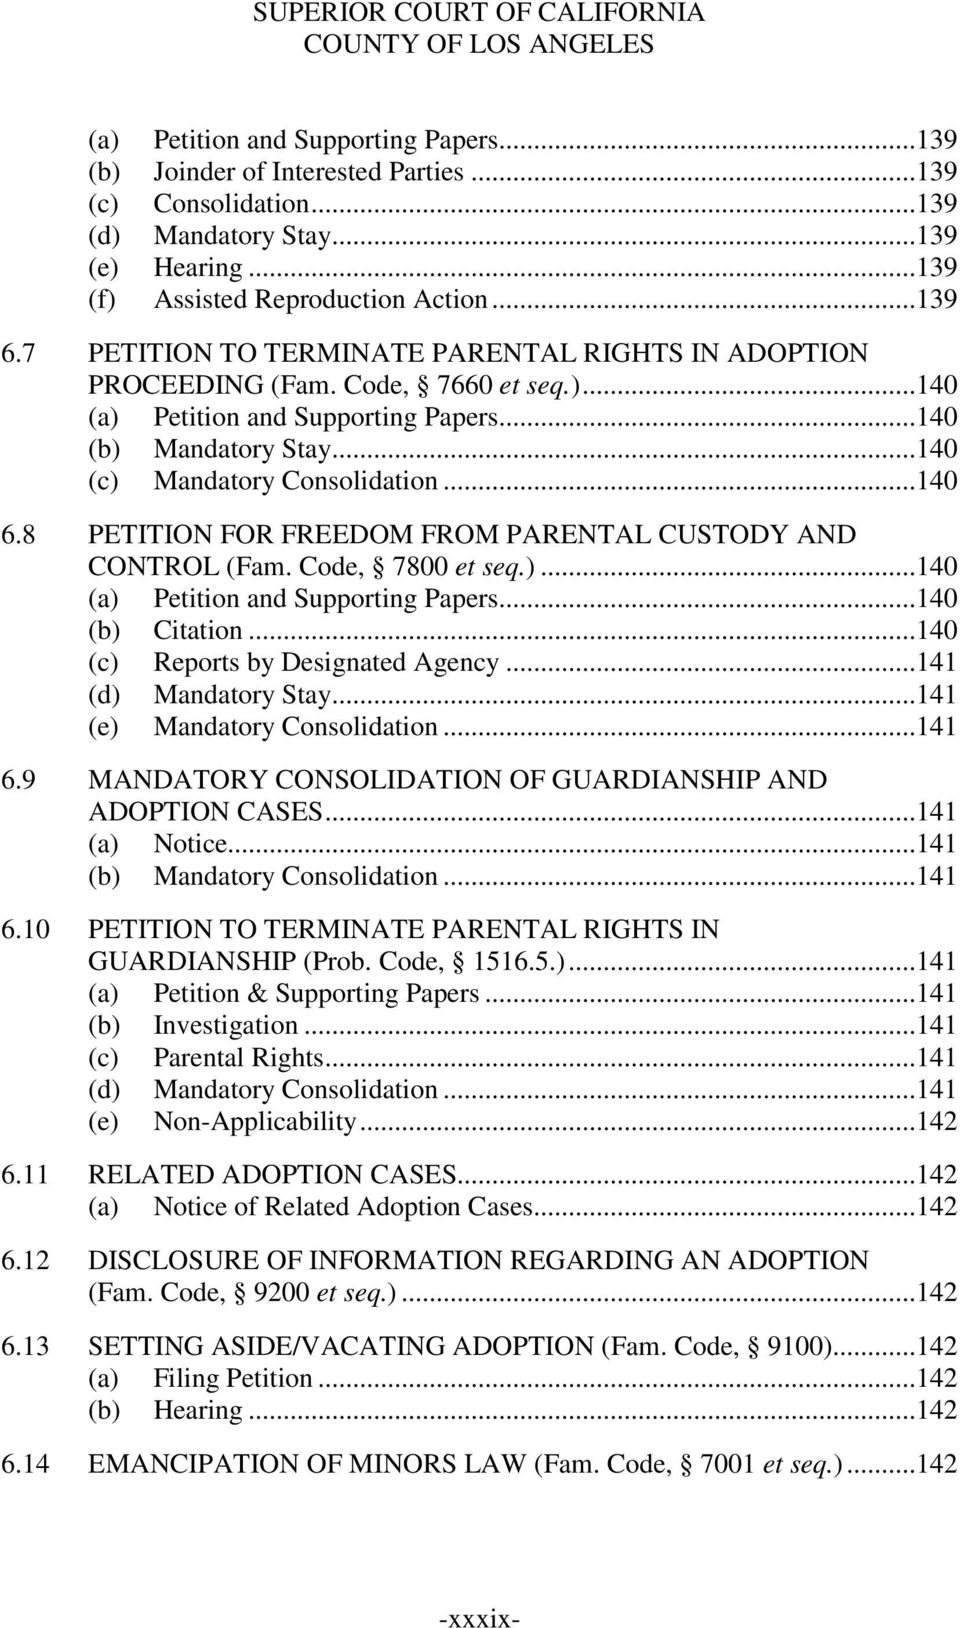 8 PETITION FOR FREEDOM FROM PARENTAL CUSTODY AND CONTROL (Fam. Code, 7800 et seq.)...140 (a) Petition and Supporting Papers...140 (b) Citation...140 (c) Reports by Designated Agency.